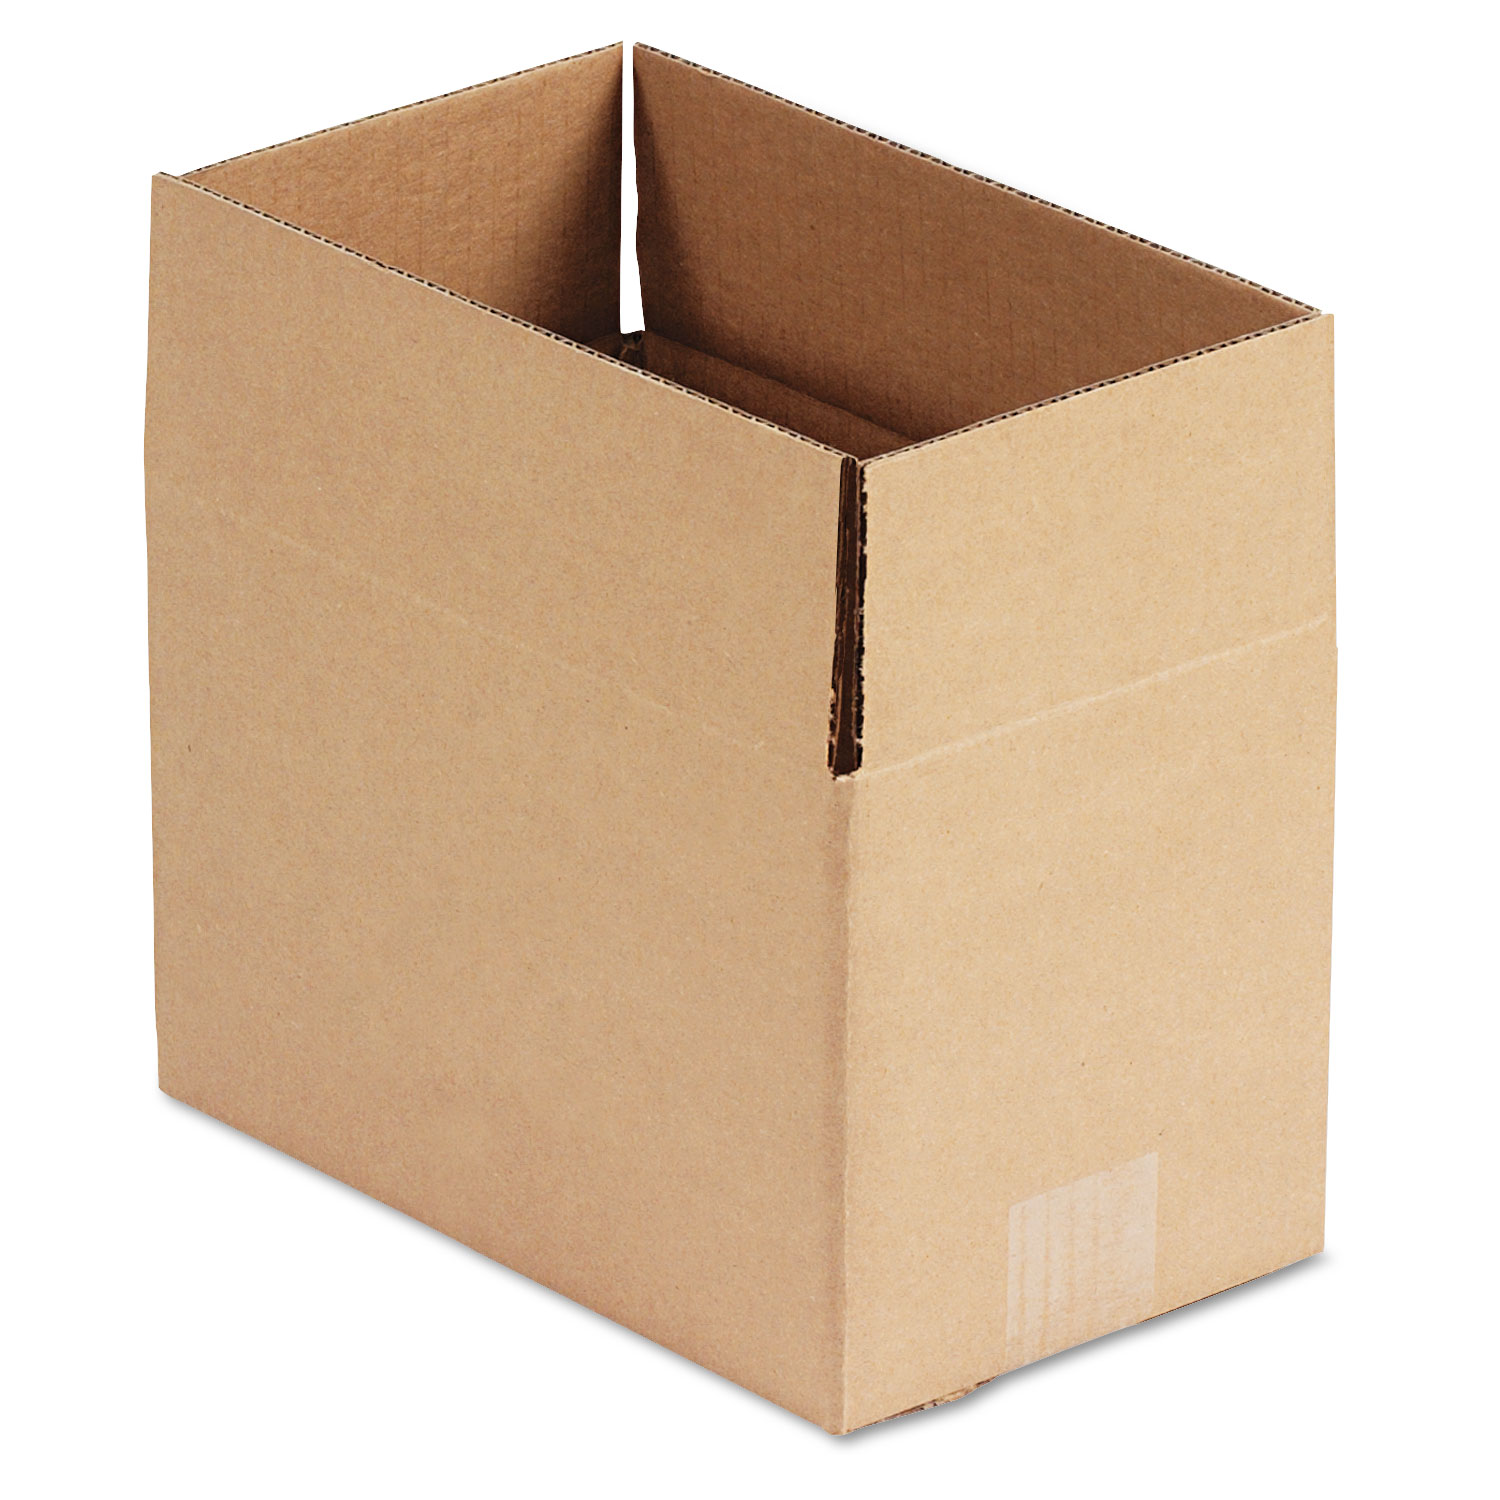 Fixed-Depth Shipping Boxes, Regular Slotted Container (RSC), 10" x 6" x 6", Brown Kraft, 25/Bundle